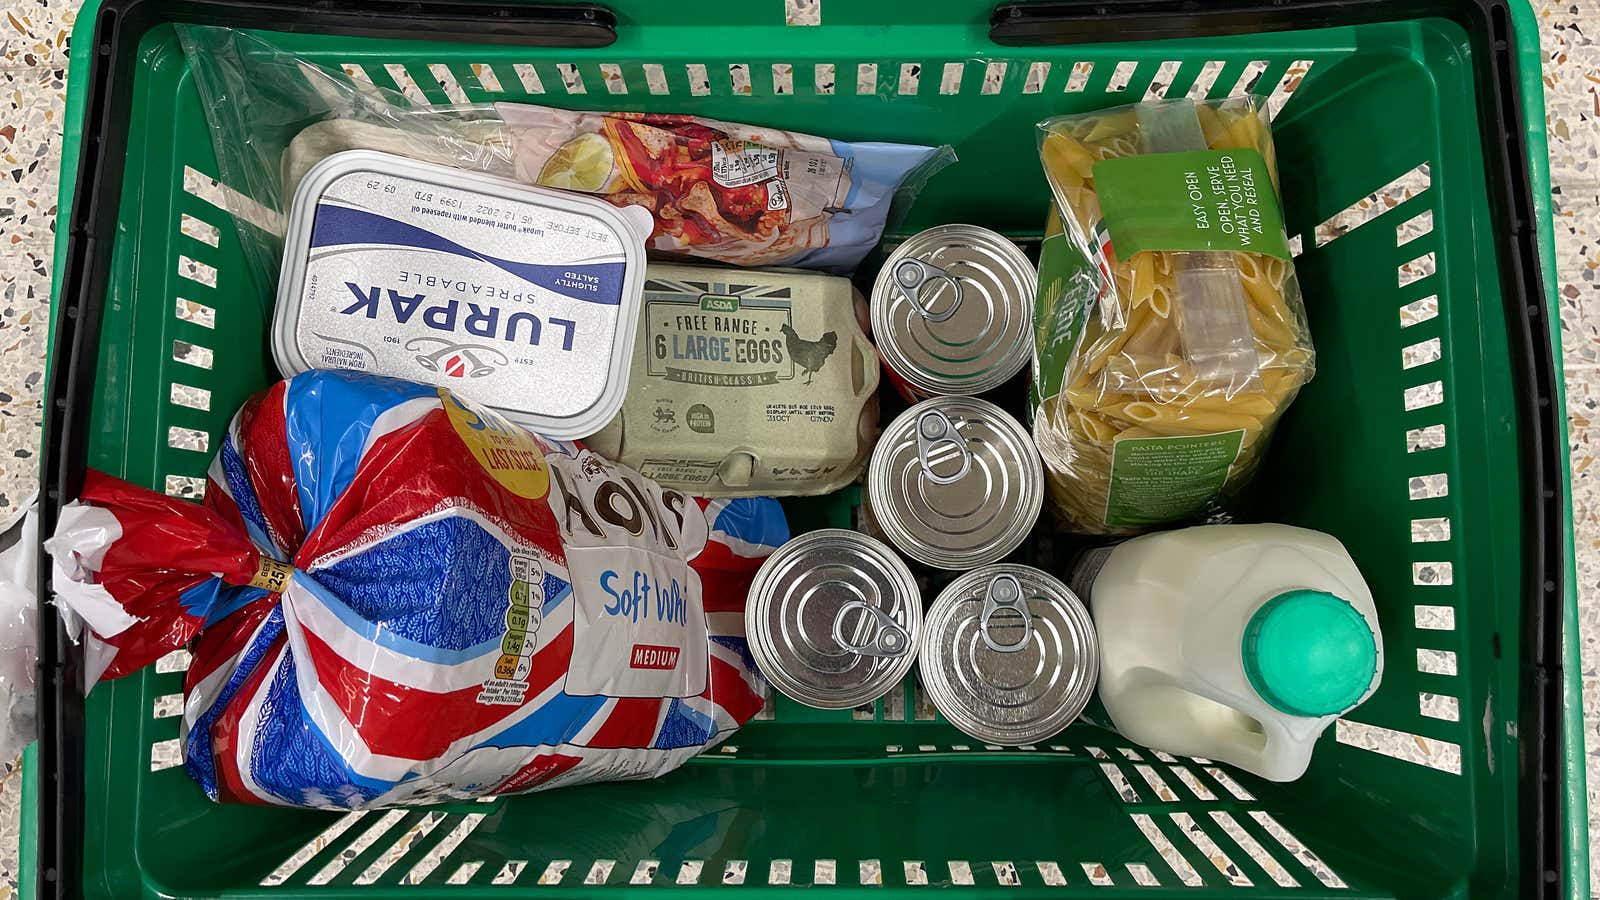 An Asda shopping basket containing groceries taken on October 19, 2022 in Manchester, United Kingdom.
